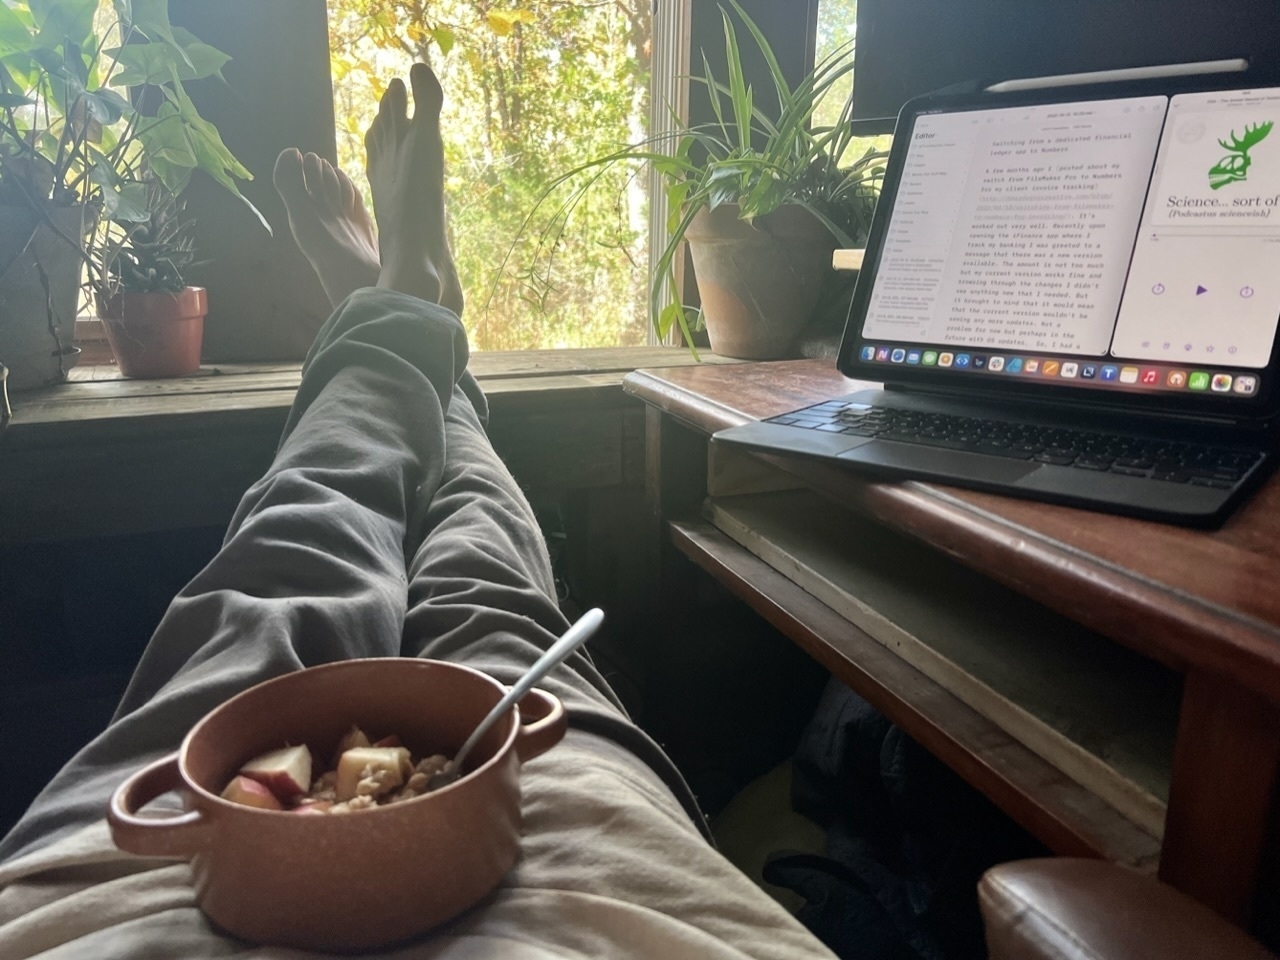 legs extending out from photograph propped up on wood shelf. There is a bowl of oatmeal sitting on a persons lap and to the right a desk with an iPad. Opposite of the person is an open window with light shining in.